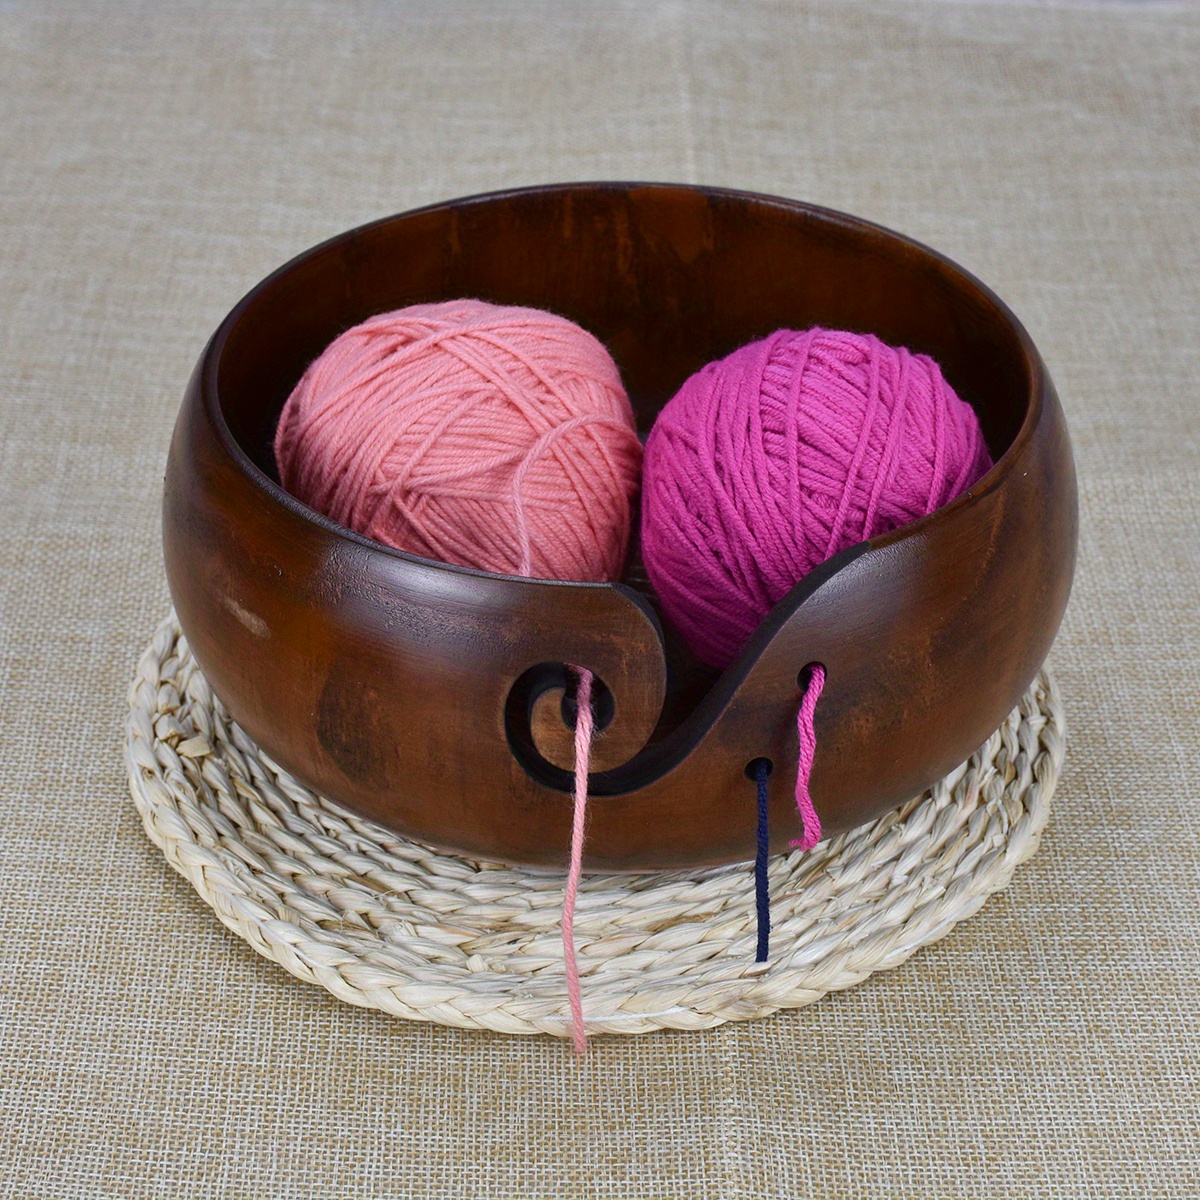  Joyeee Handmade Yarn Bowl, 6.3'' Crafted Wooden Yarn Storage  Bowl with Lid Crocheting Knitting Bowl Yarn Holder Gift for Knitting  Crochet Enthusiasts